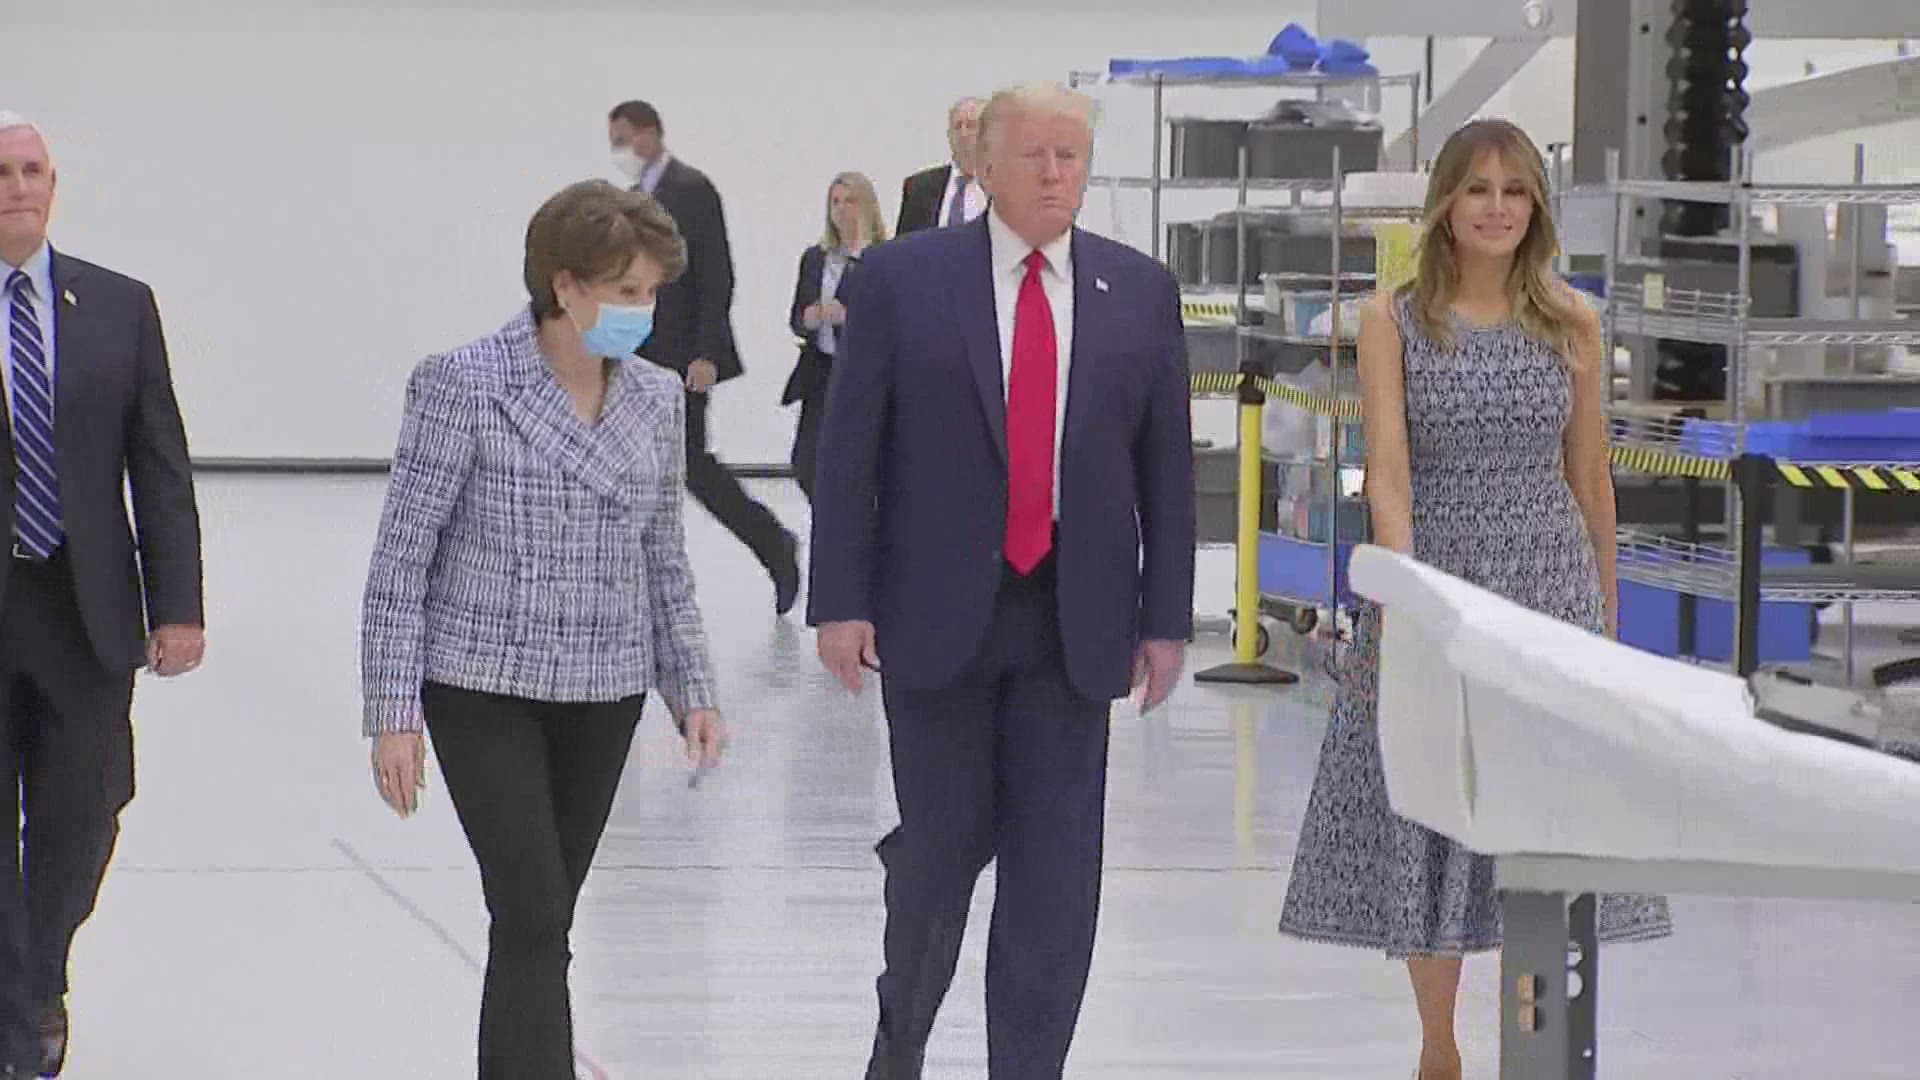 The President plans to tour the Puritan swab manufacturing site in Guilford on Friday.